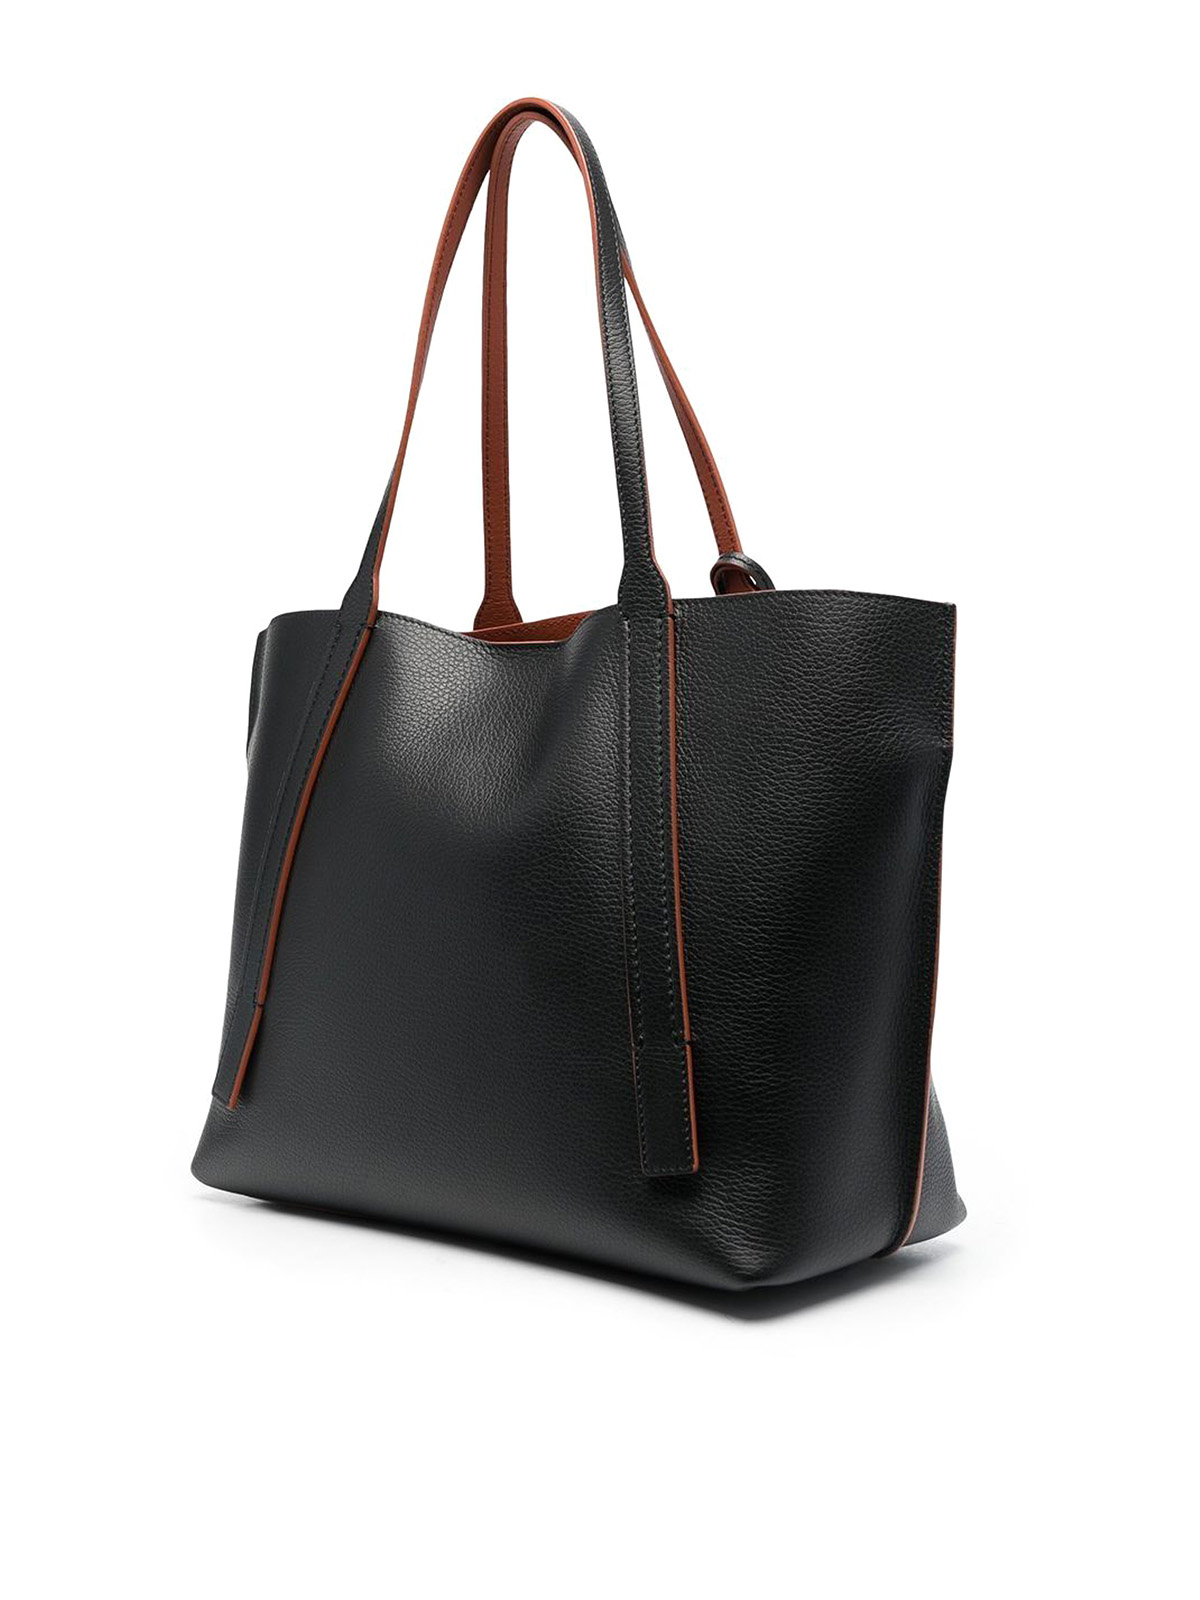 Furla contrast-lining Leather Tote Bag